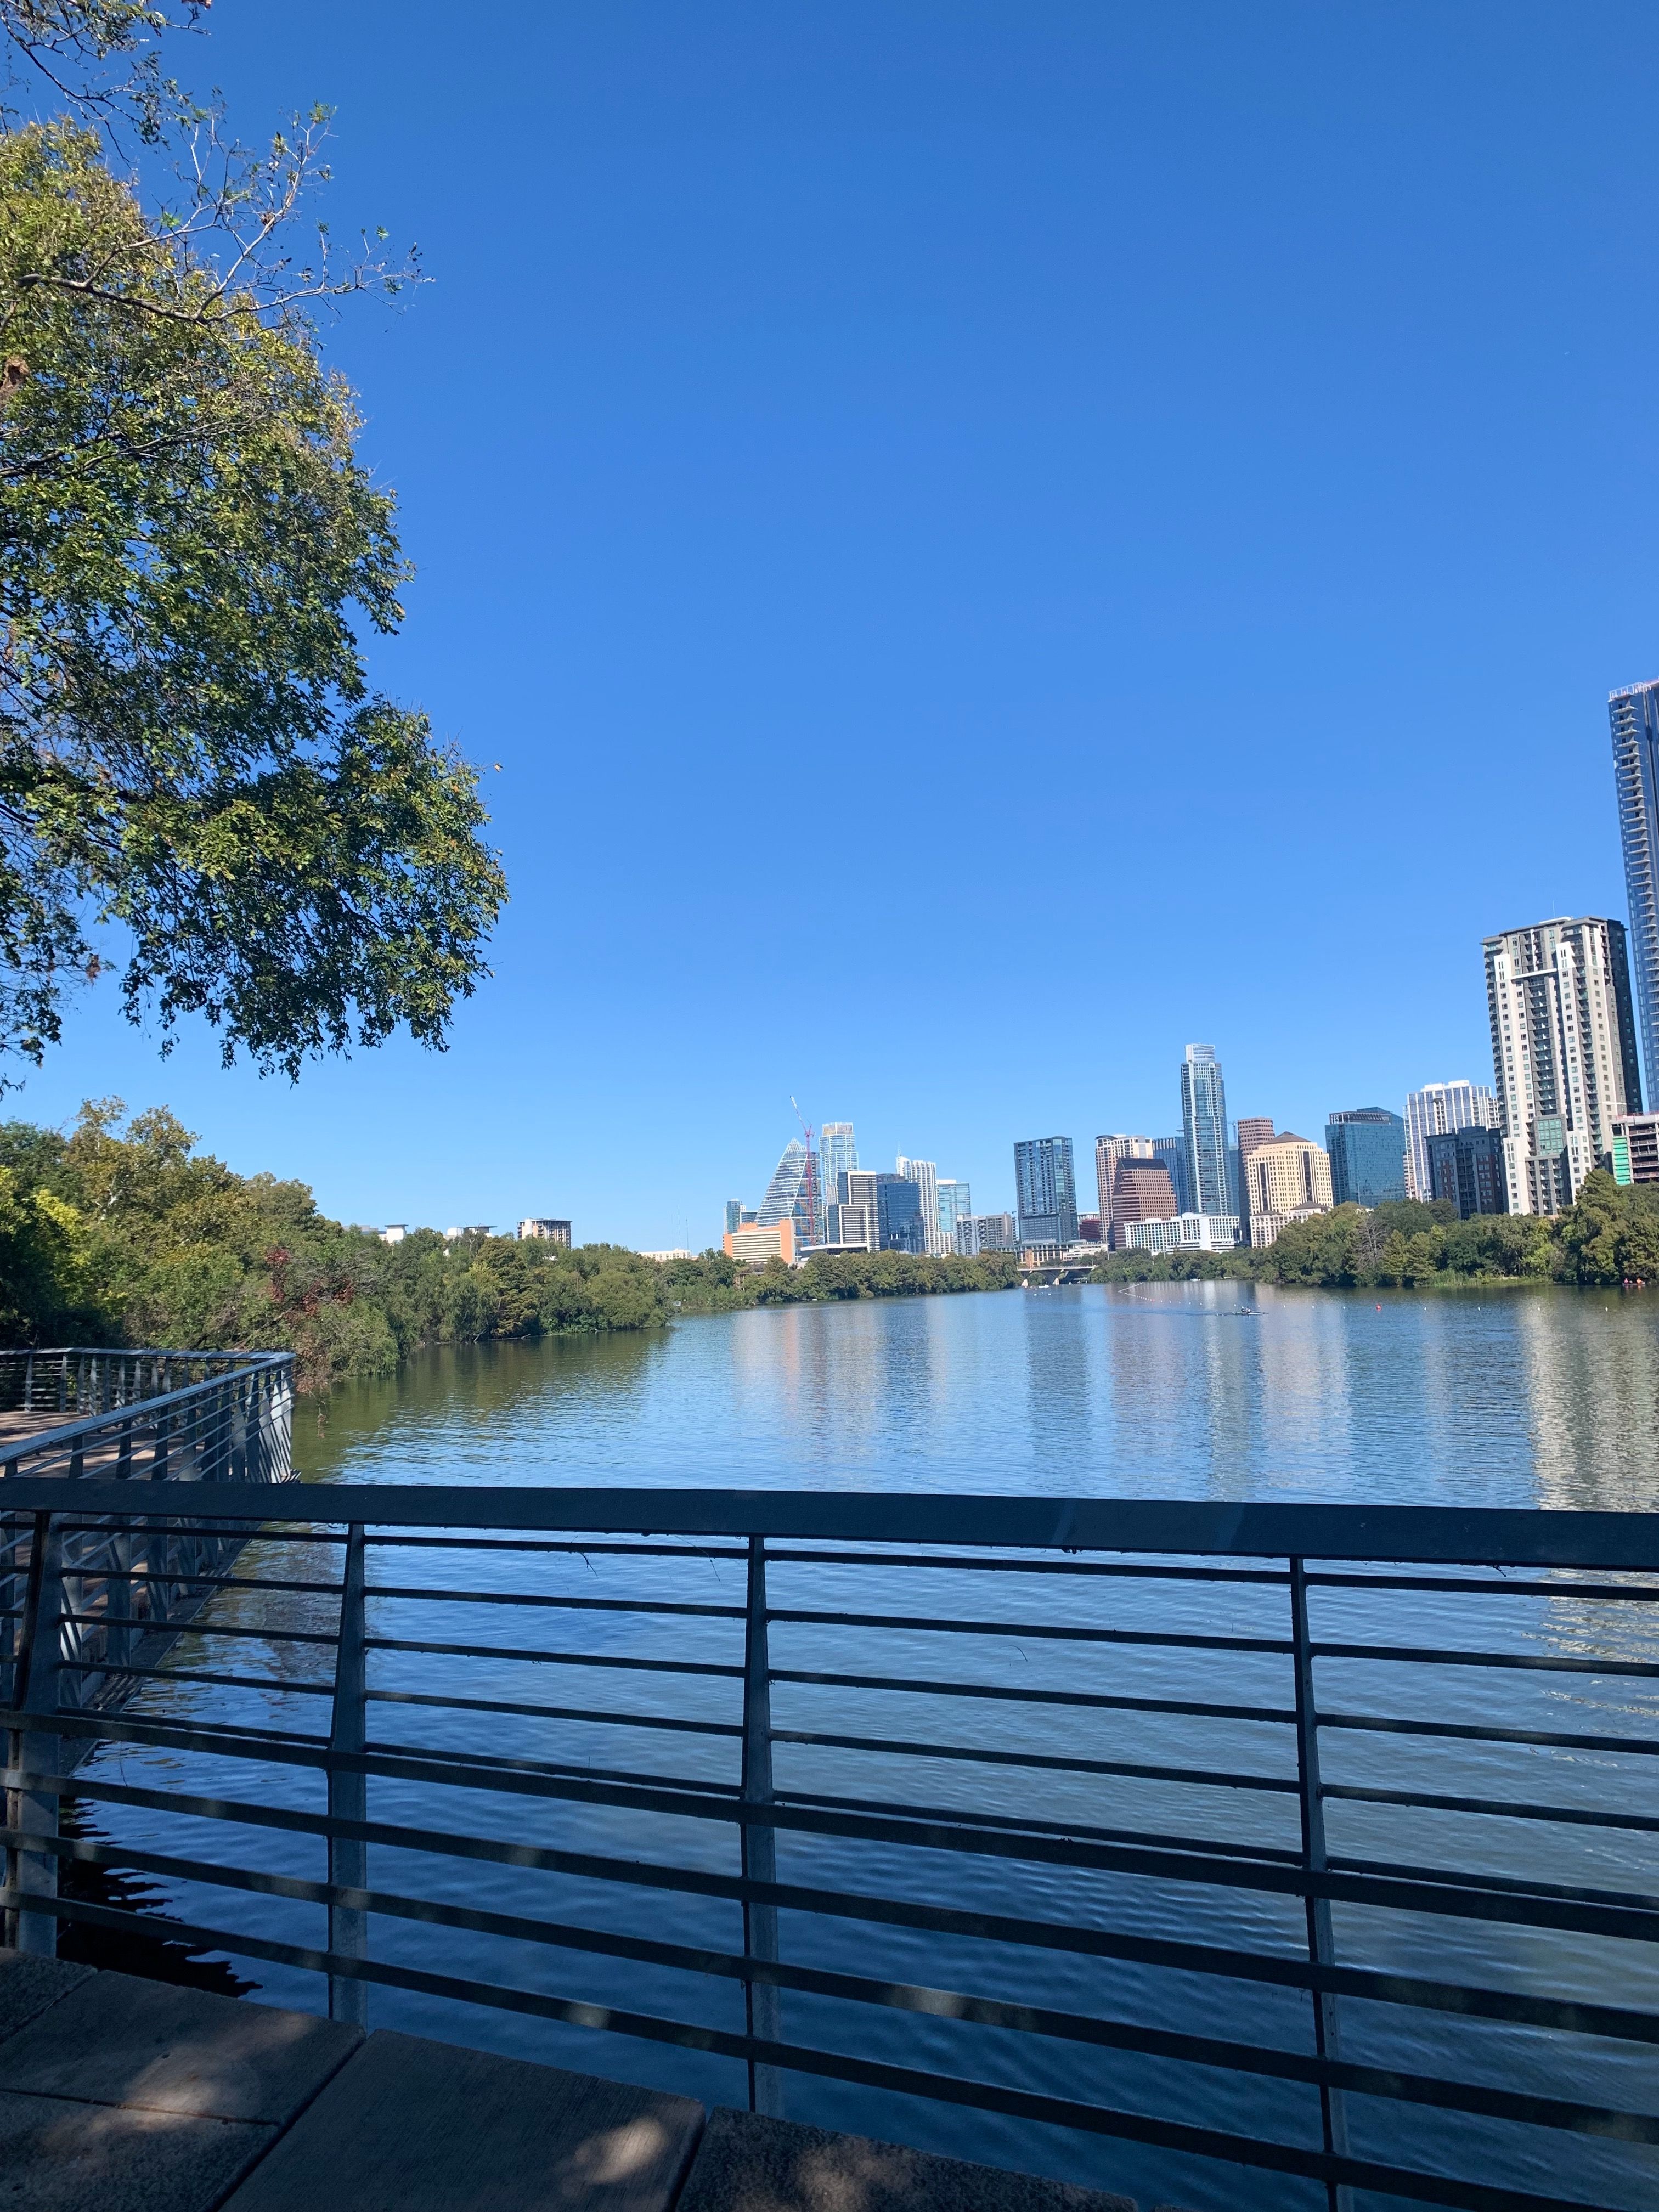 A view of Lady Bird Lake from a walking path